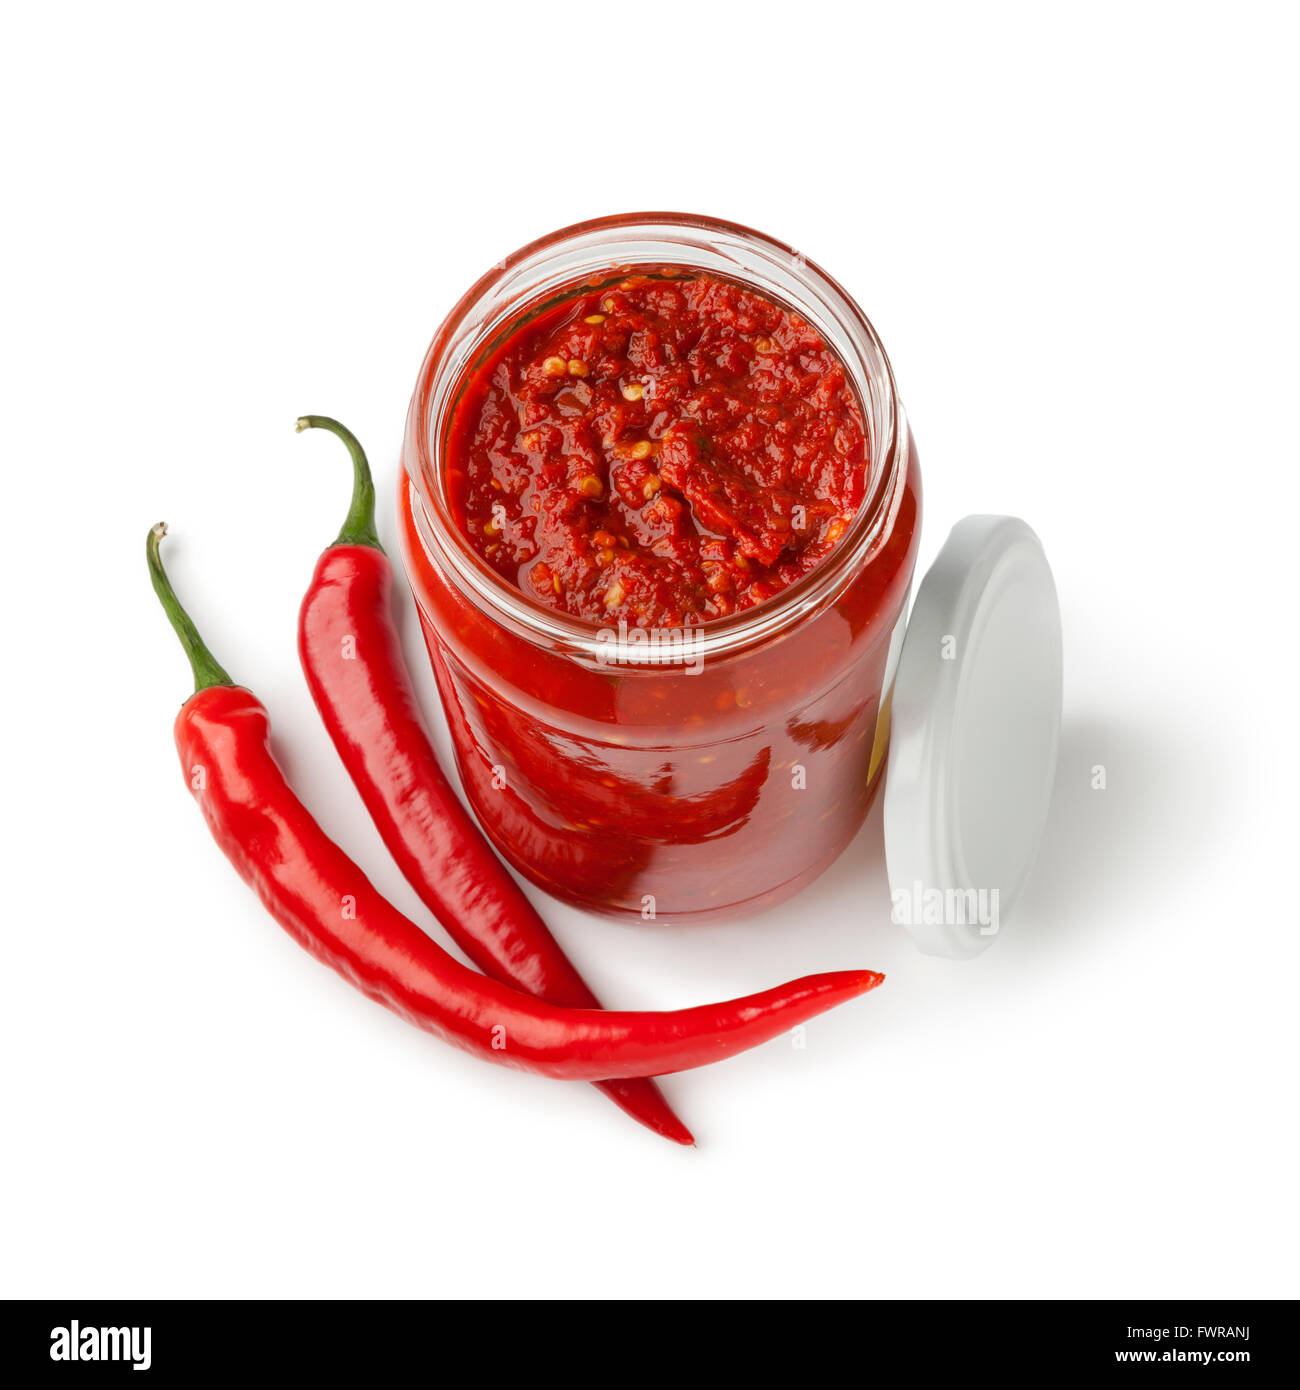 Glass jar with traditional Indonesian Sambal and fresh red chili peppers on white background Stock Photo